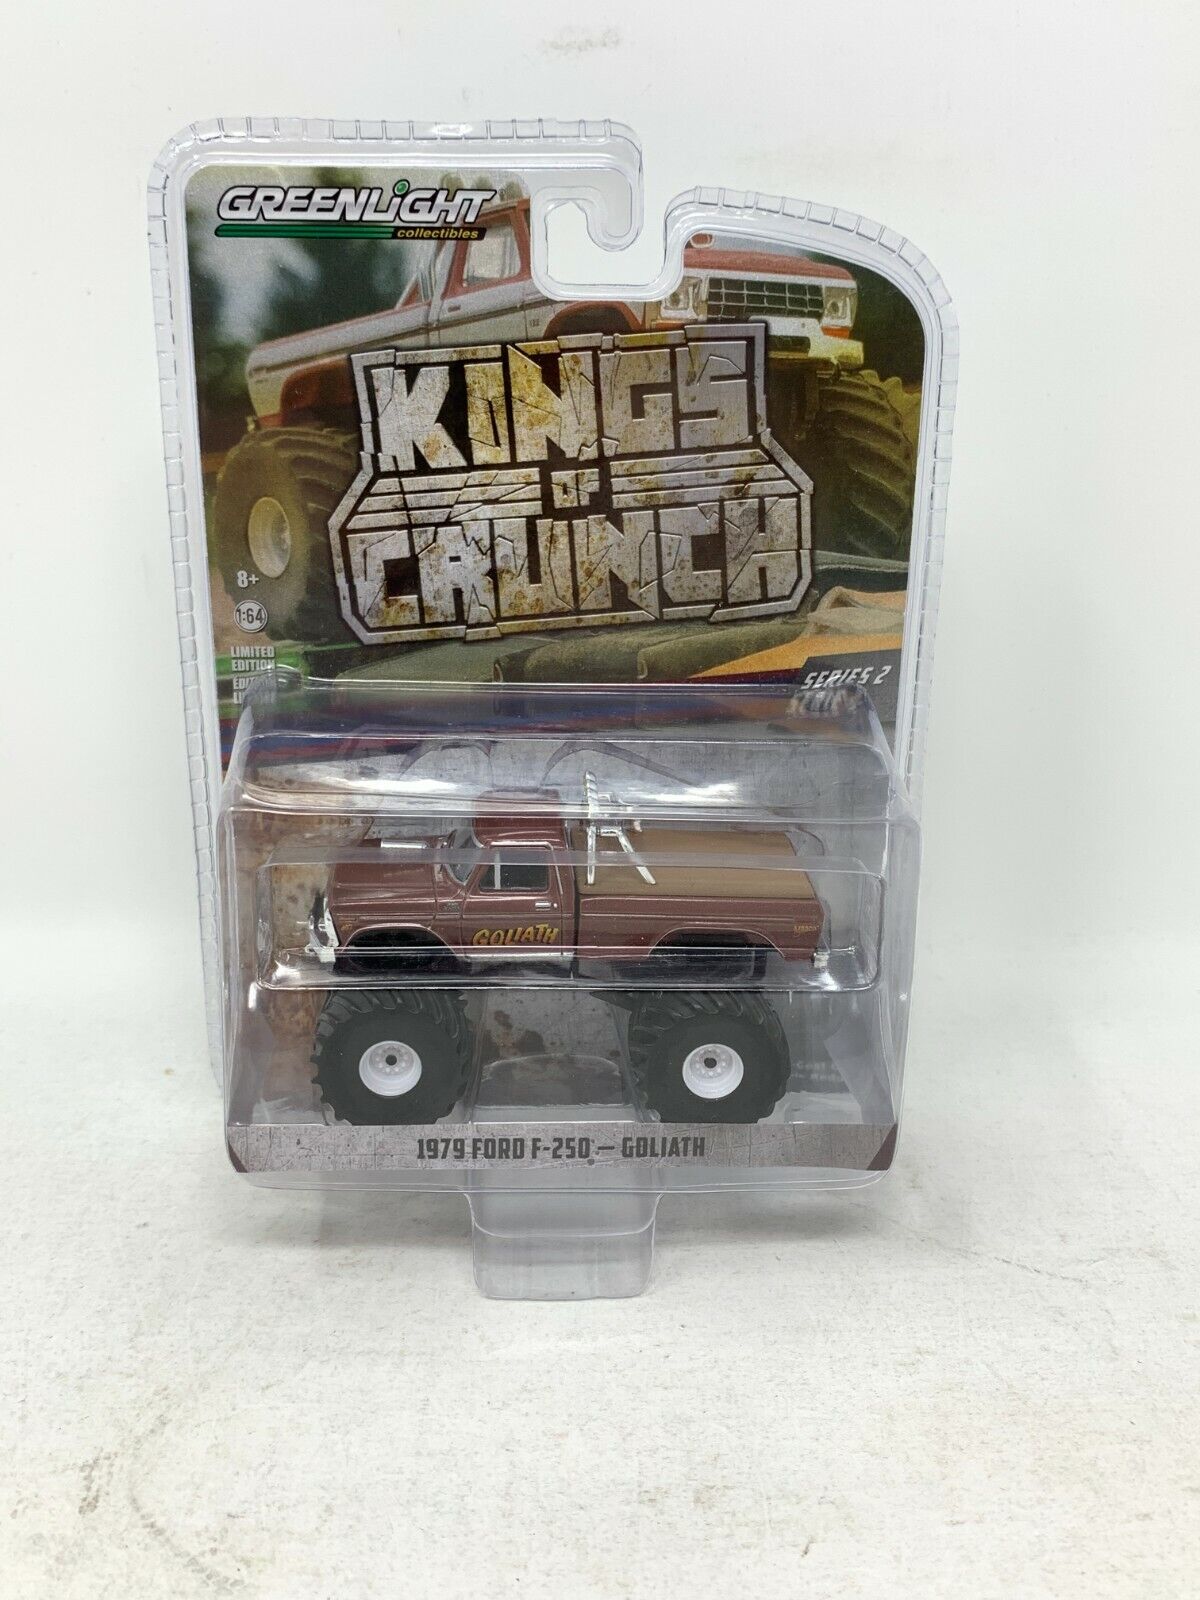 Greenlight Kings of Crunch Series 2 1979 Ford F-250 - Goliath 1:64 Diecast